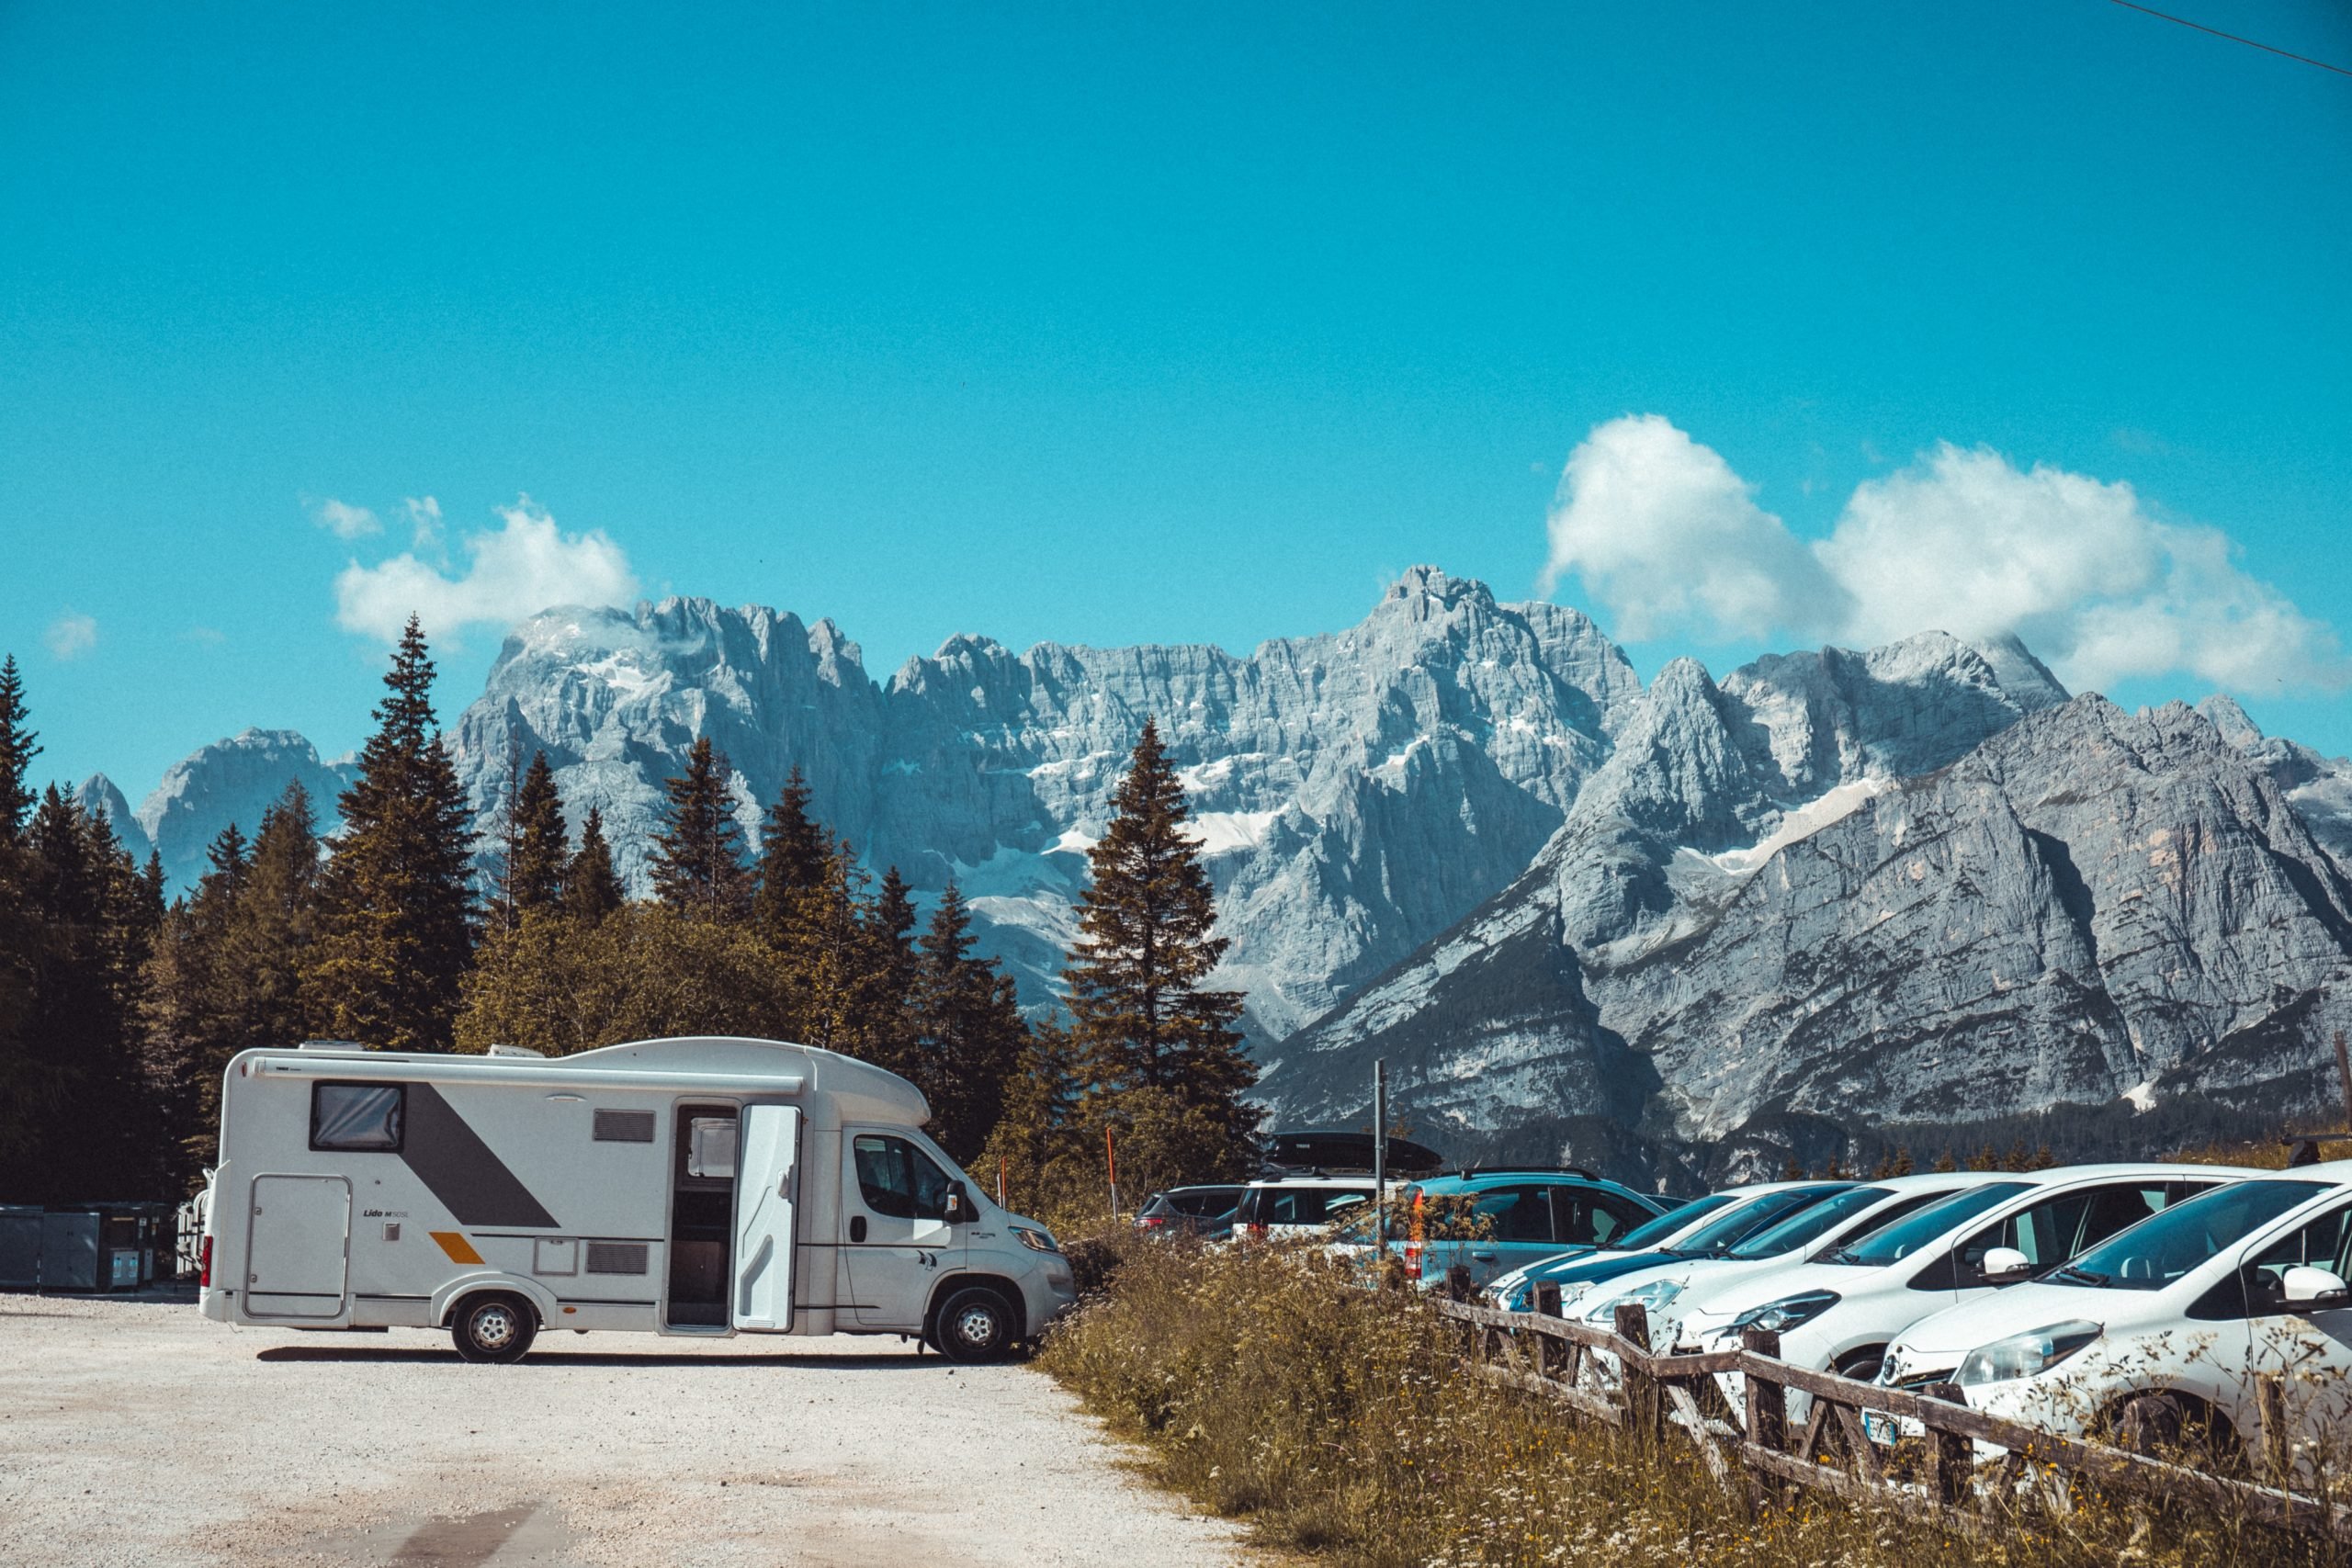 You might find your Italian campsite is less of a peaceful haven than expected.